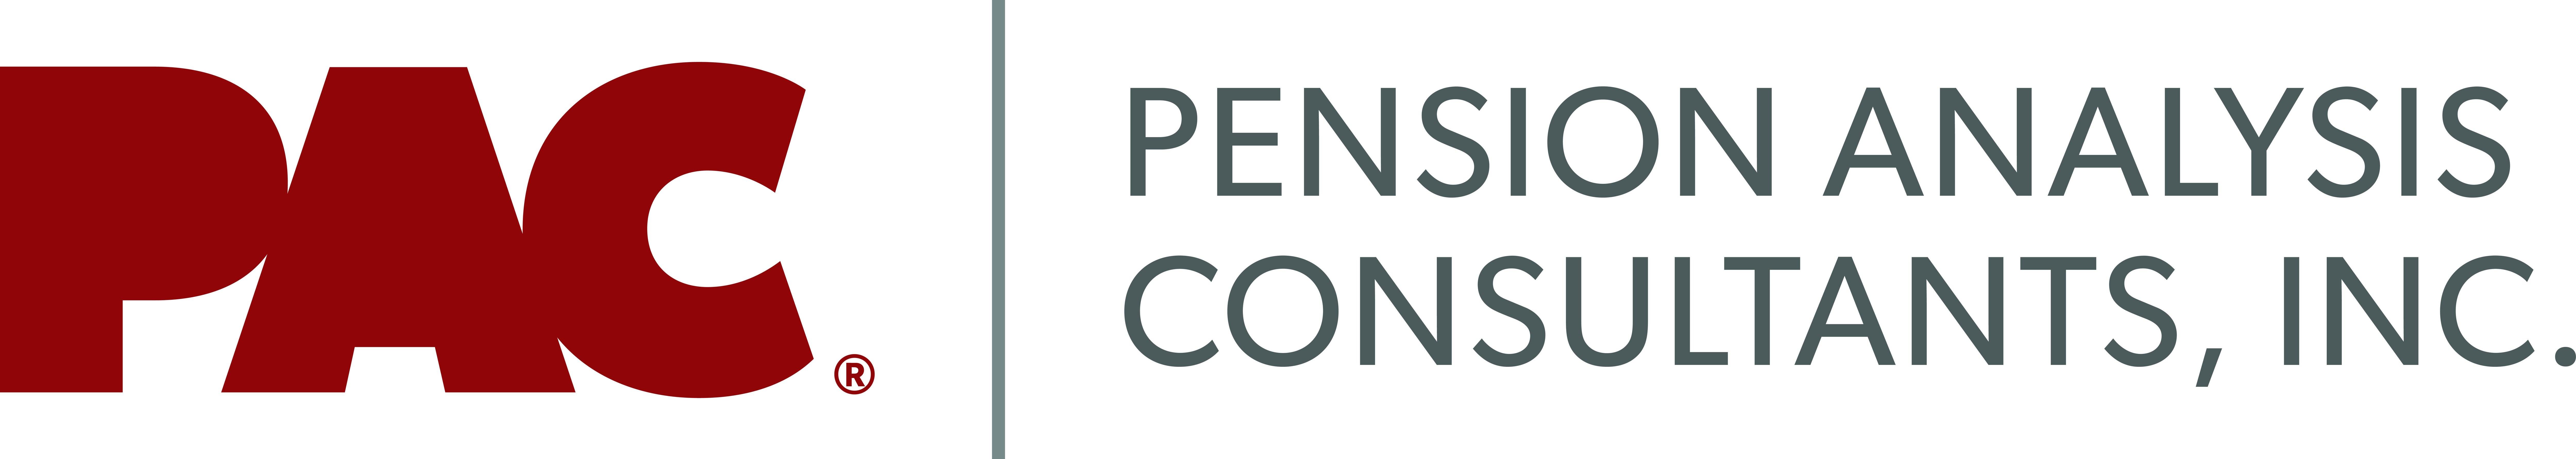 Pension Analysis Consultants